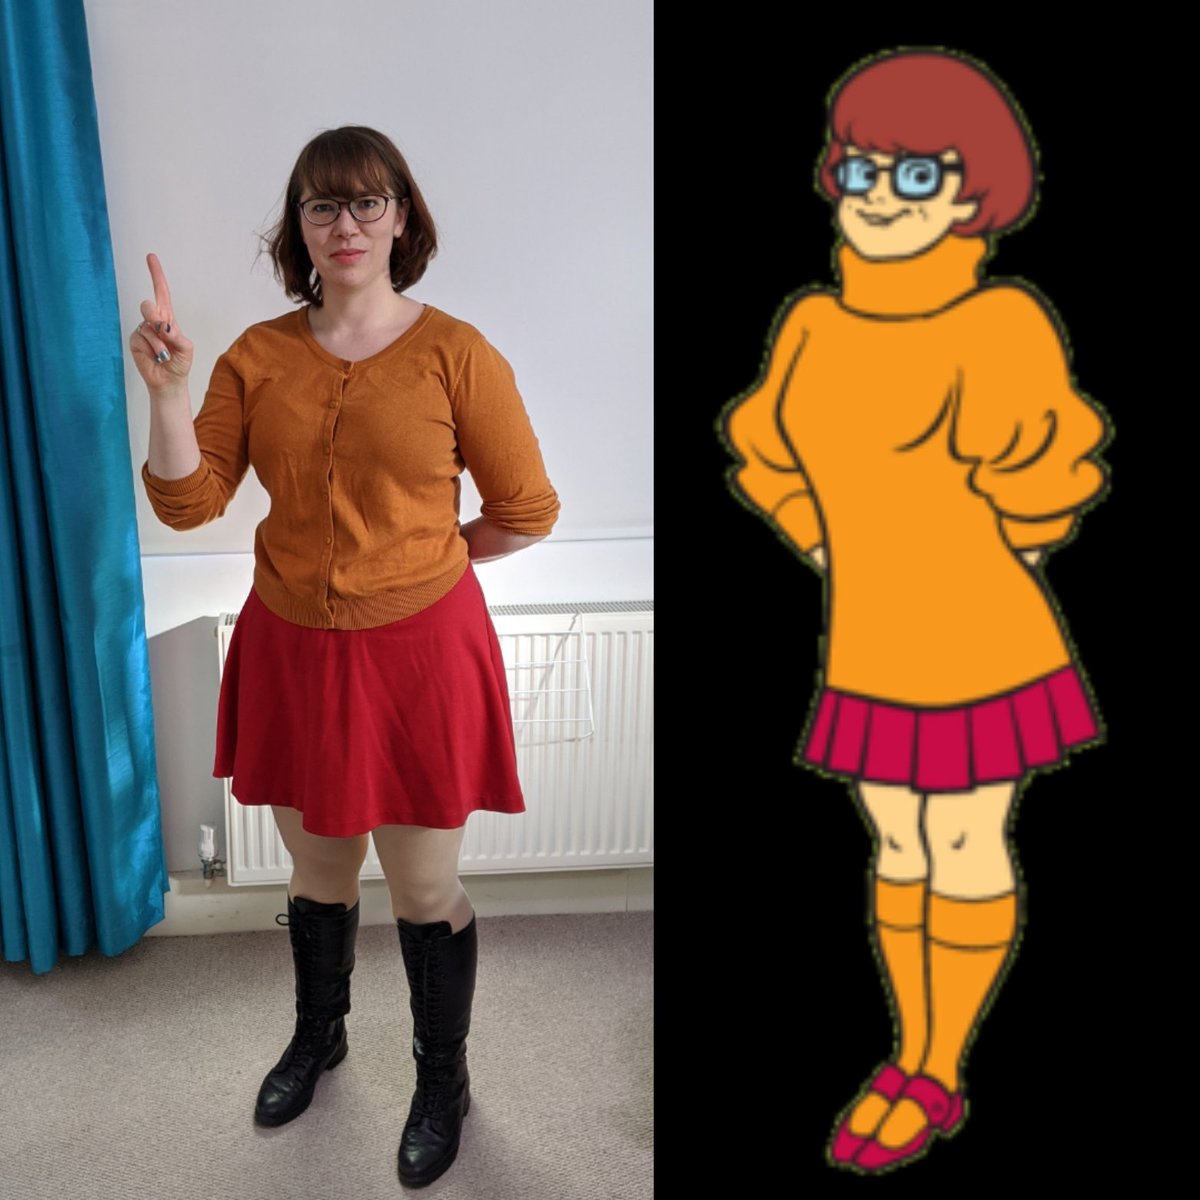 Jinkies! Velma's got a plan. Part of my 26 costumes in two days  #TwoPointSixChallenge.  https://uk.virginmoneygiving.com/RebeccaCooney2 )All slots are now full! But if you're enjoying watching me look daft, feel free to donate to these two important causes anyway x